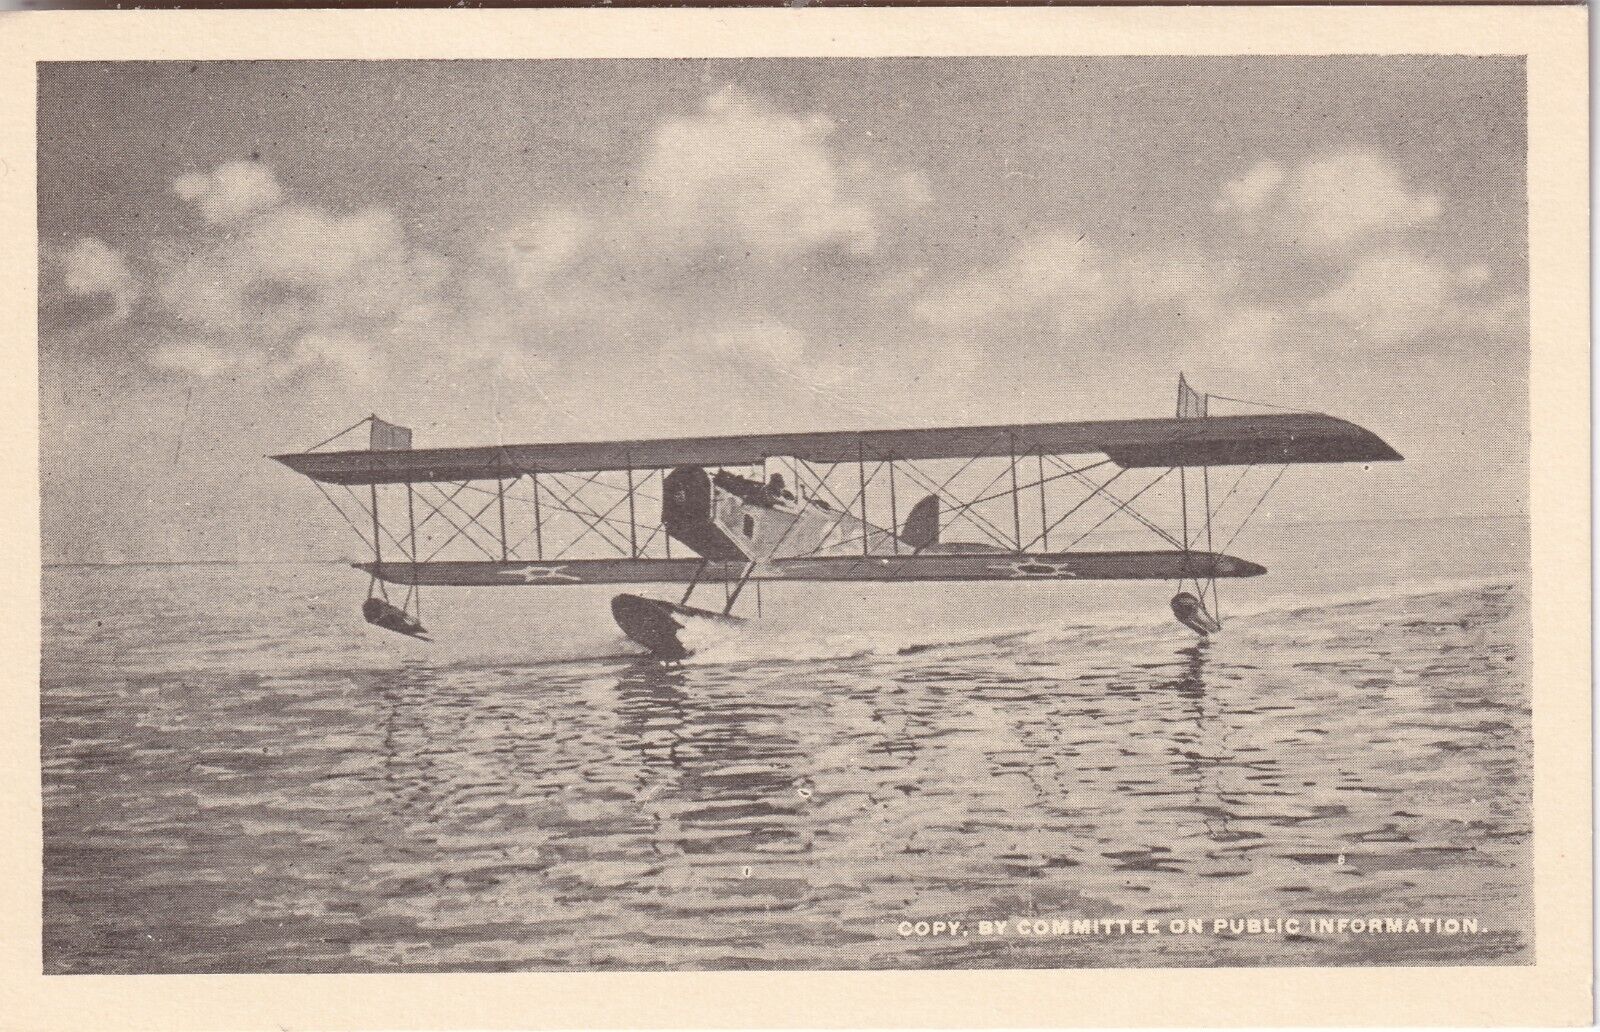 Vintage Postcard - Picture of an Early Biplane Seaplane Landing on Water